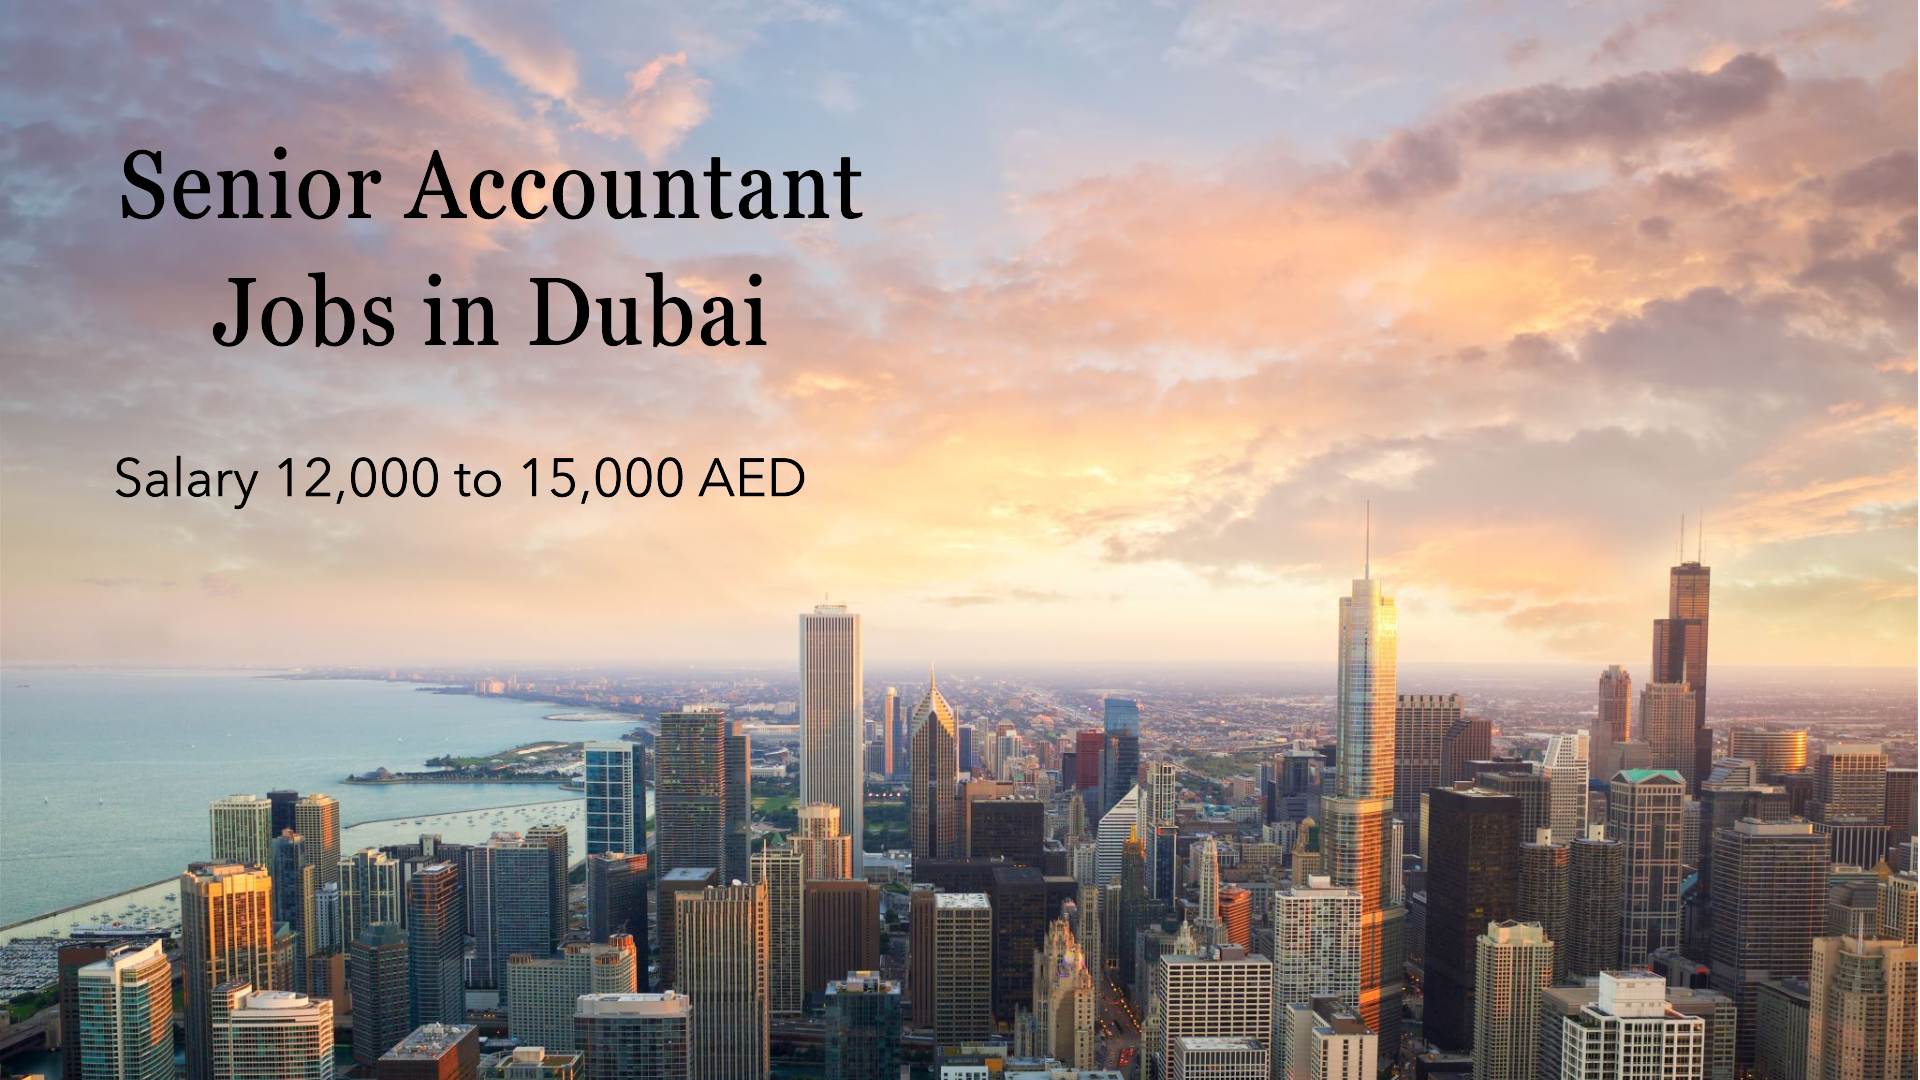 senior accountant jobs in dubai for all nationalities with salary 12,000 to 15,000 AED